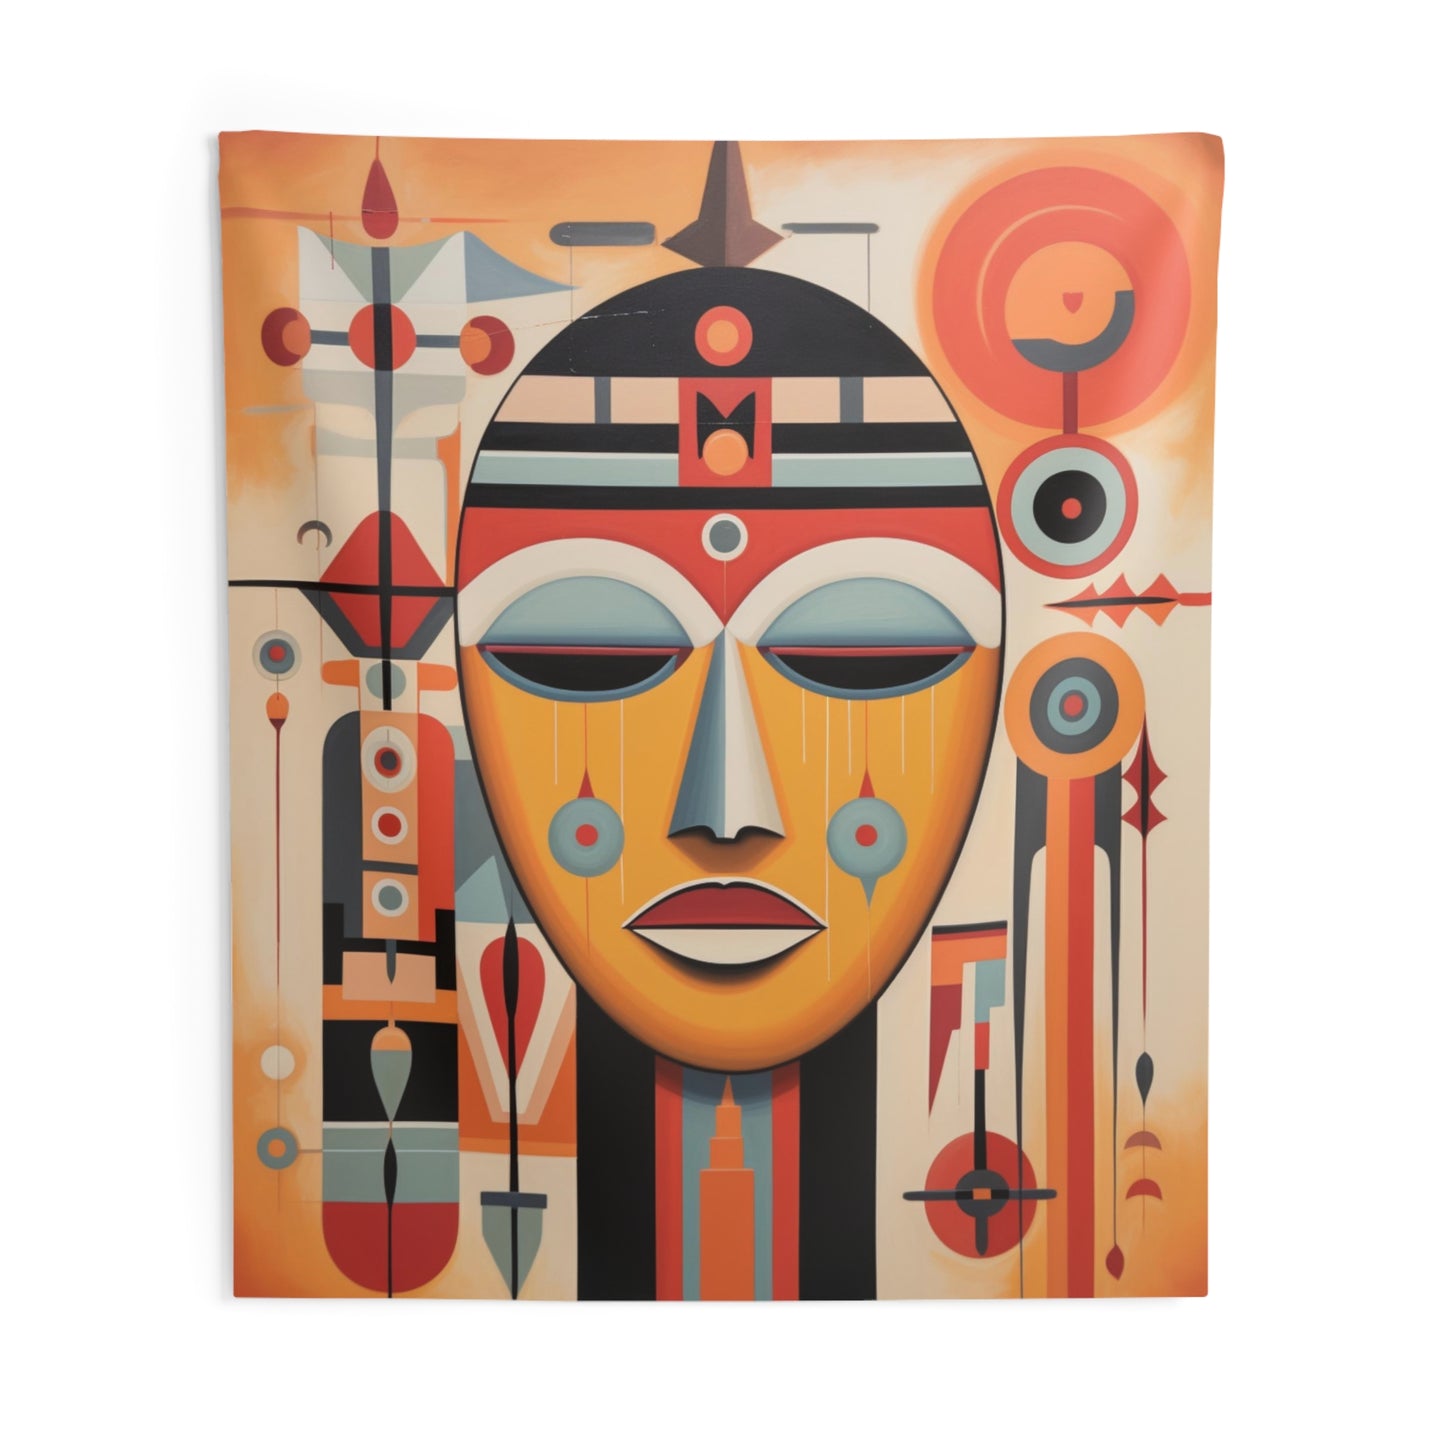 Navajo Tapestry, Totem Native American Indian Wall Art Hanging Cool Unique Vertical Aesthetic Large Small Decor Bedroom College Dorm Room Starcove Fashion